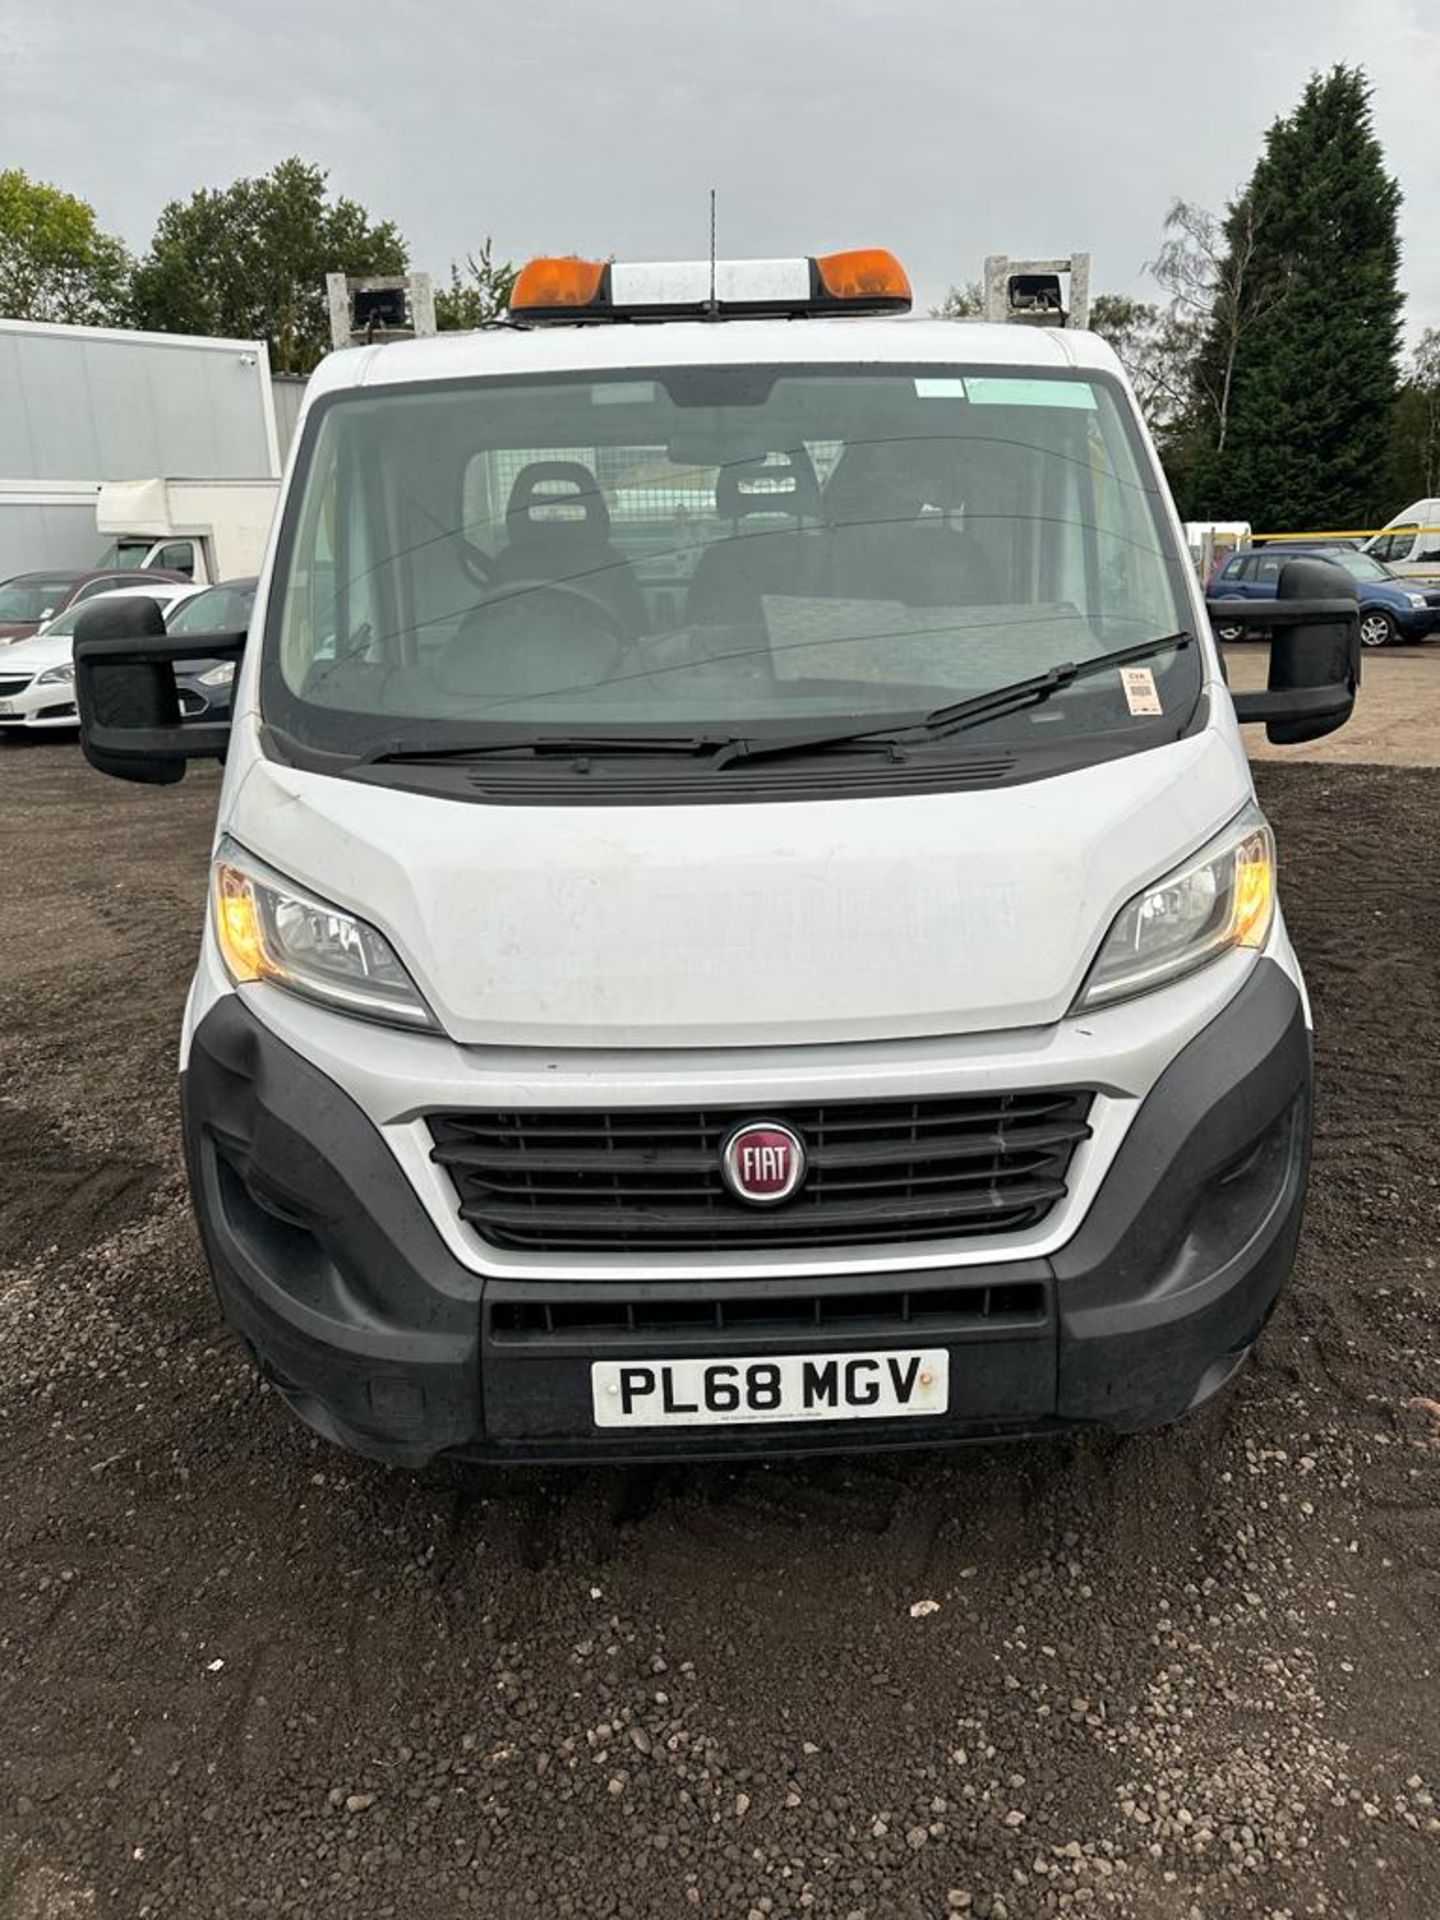 2018 68 FIAT DUCATO DROPSIDE TAIL LIFT - 115K MILES - EURO 6  - Image 4 of 11